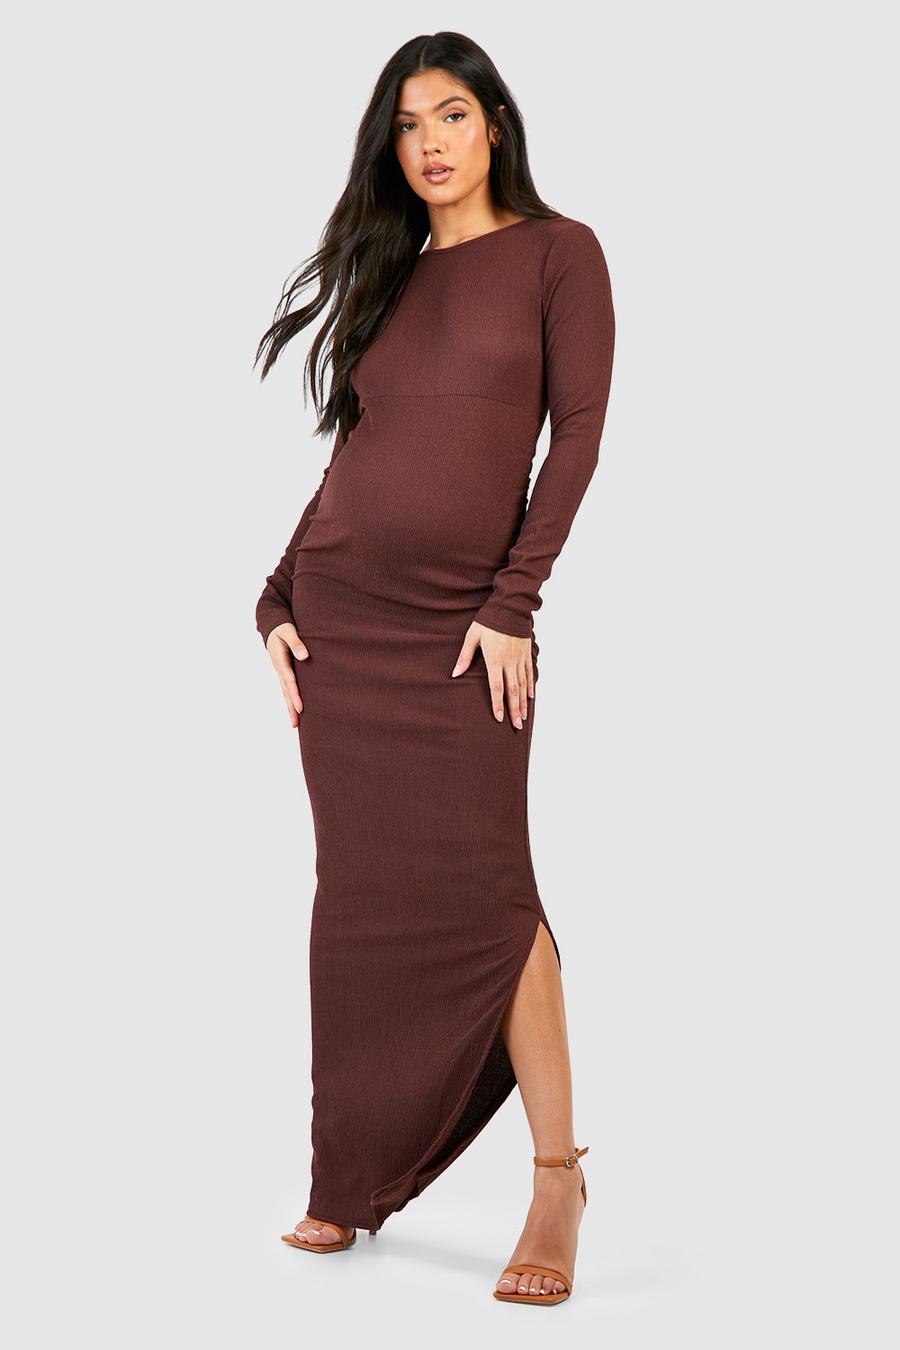 Chocolate marron Maternity Textured Ruched Seam Maxi Dress